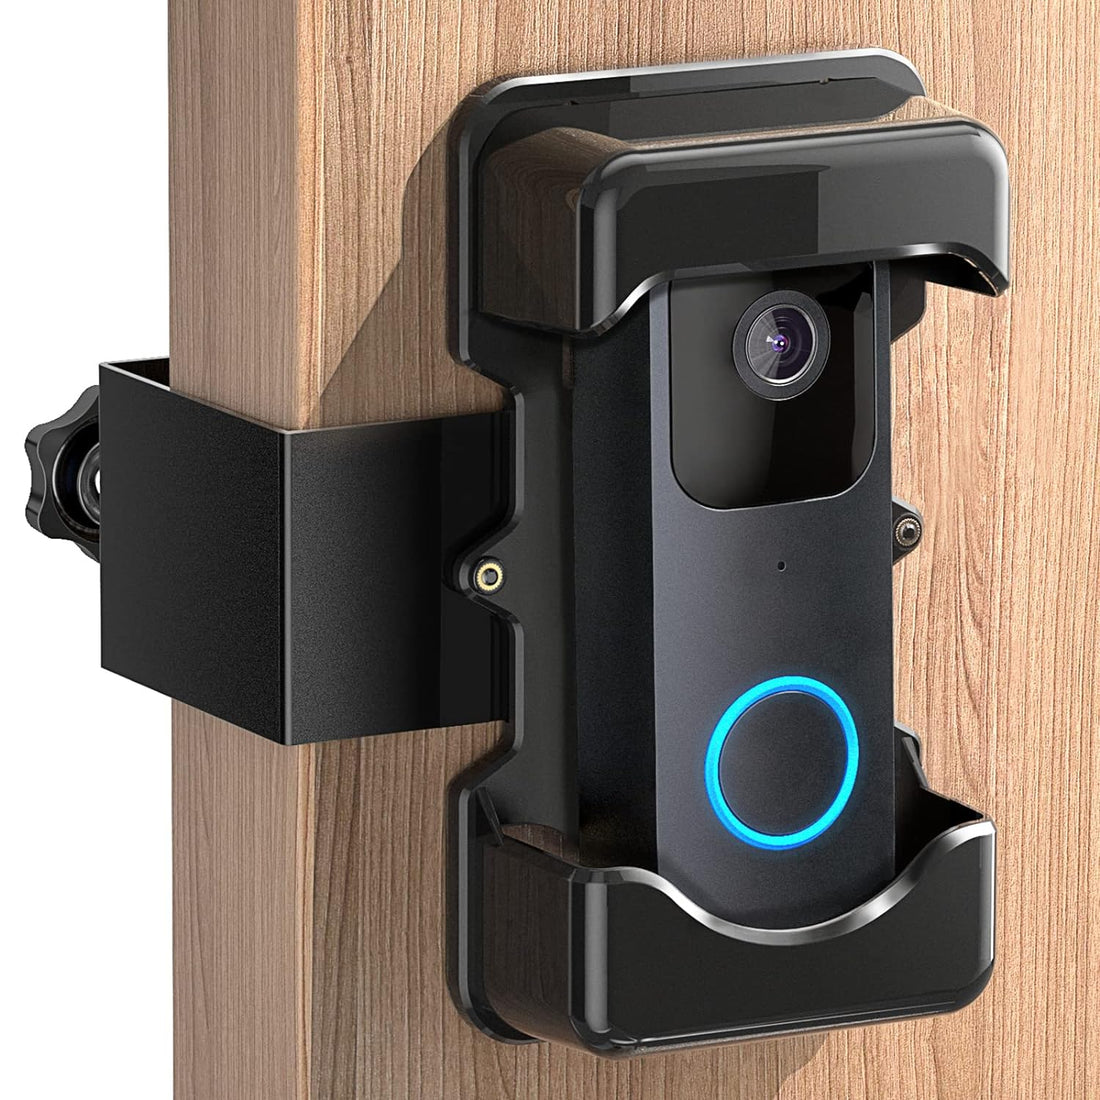 Anti-Theft Doorbell Mount,Adjustable Height(3.7’’-5.1’’), Compatible with Most Brand Video Doorbell,No-Drill & Easy to Install